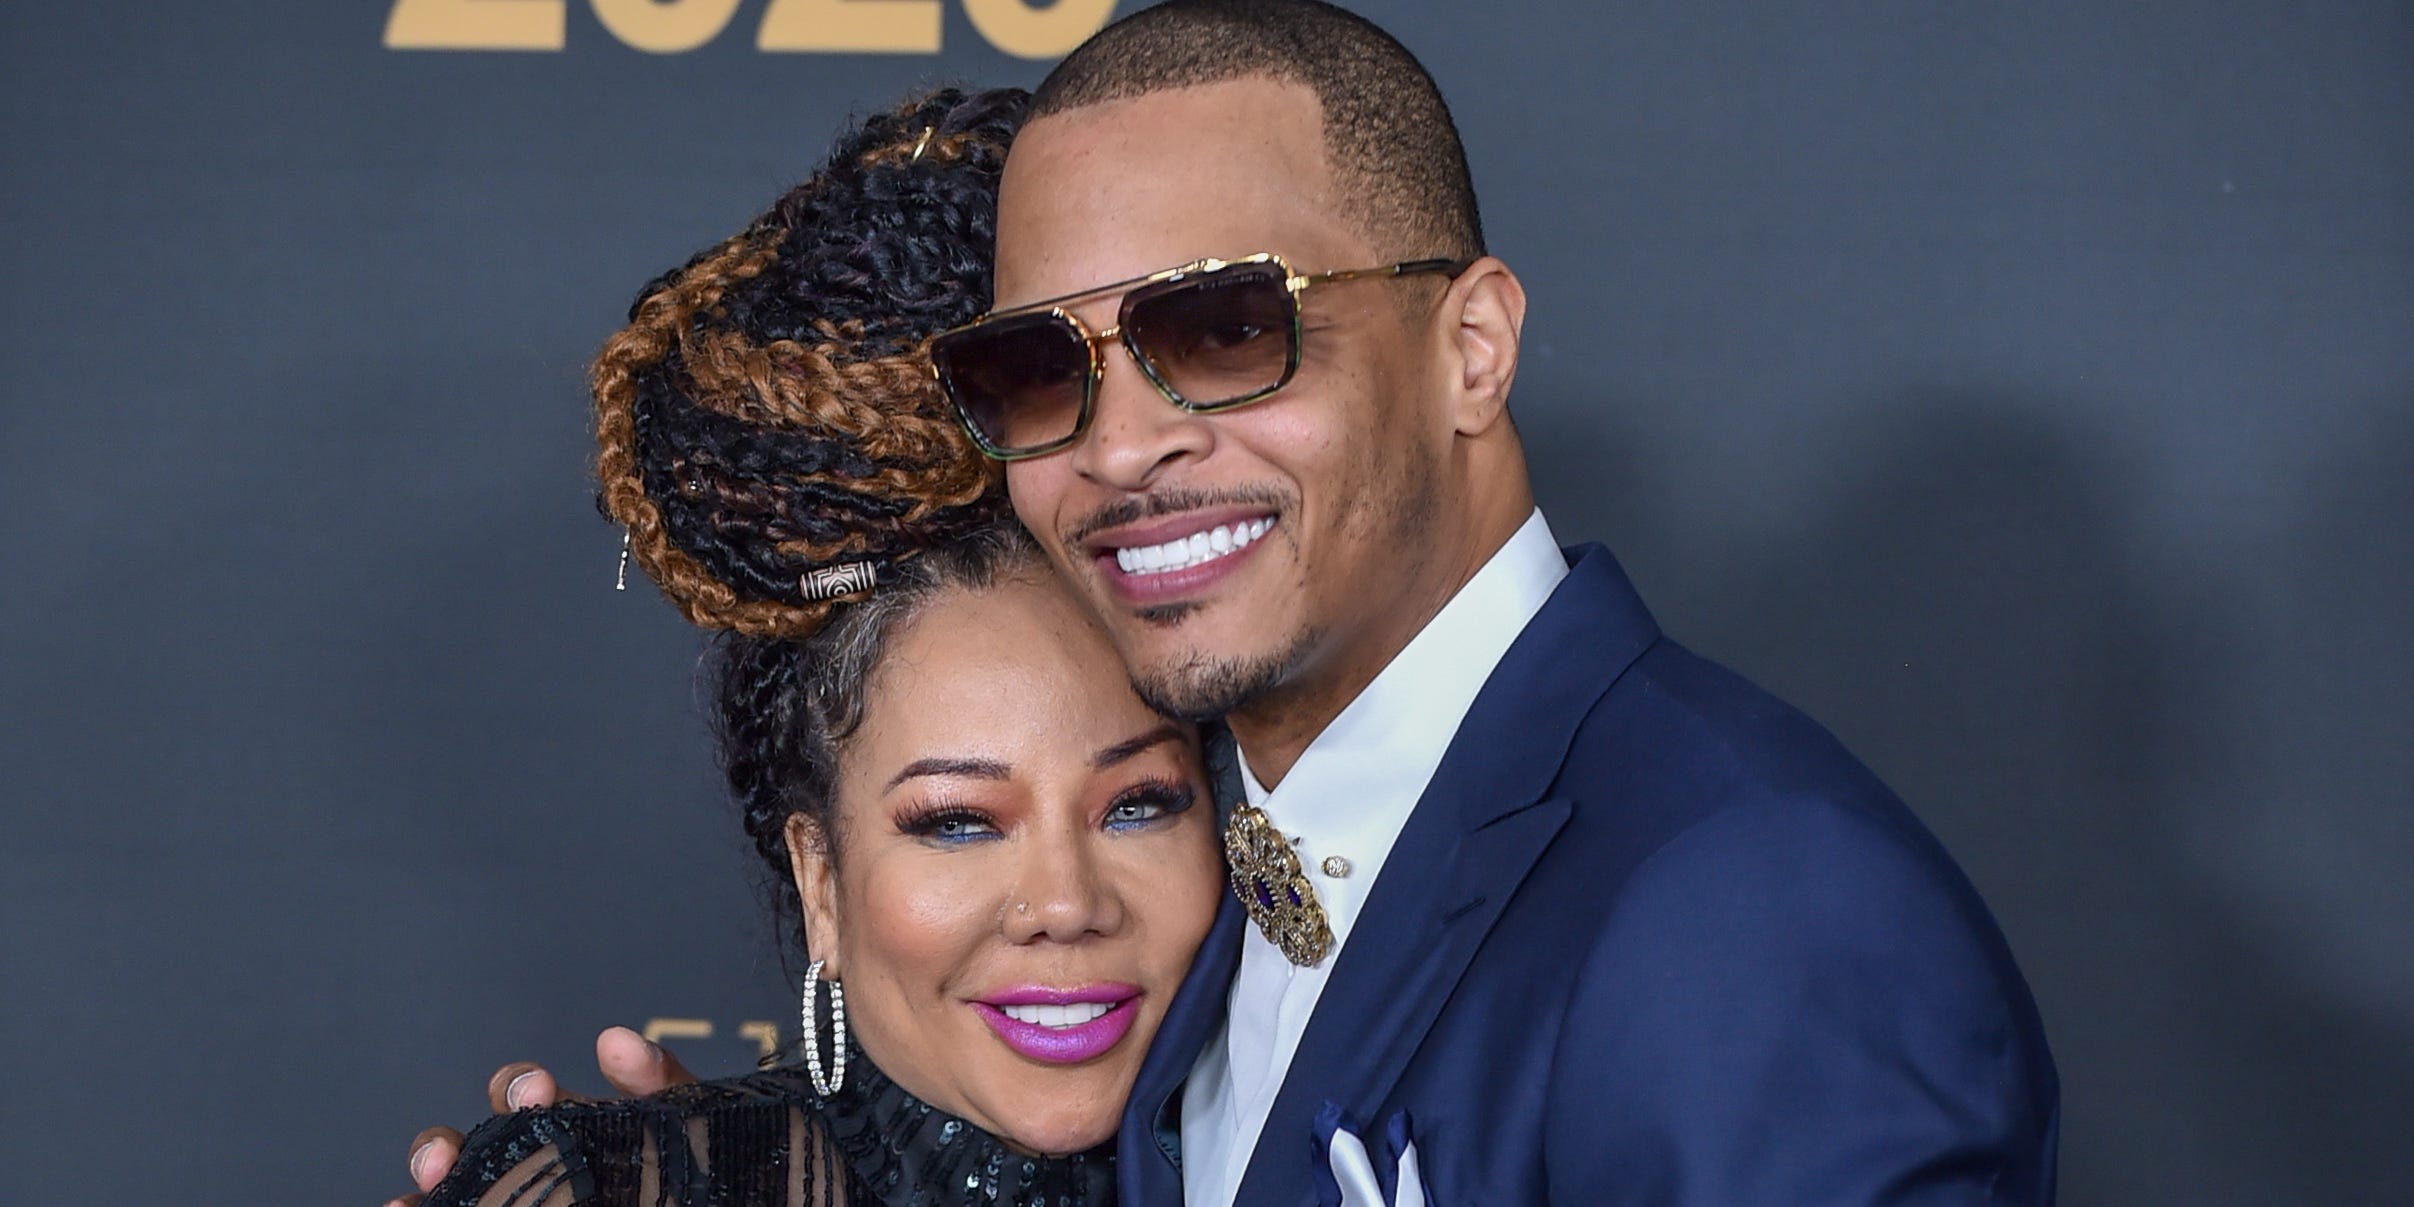 Rapper T.I. and his wife Tameka "Tiny" Harris on a red carpet